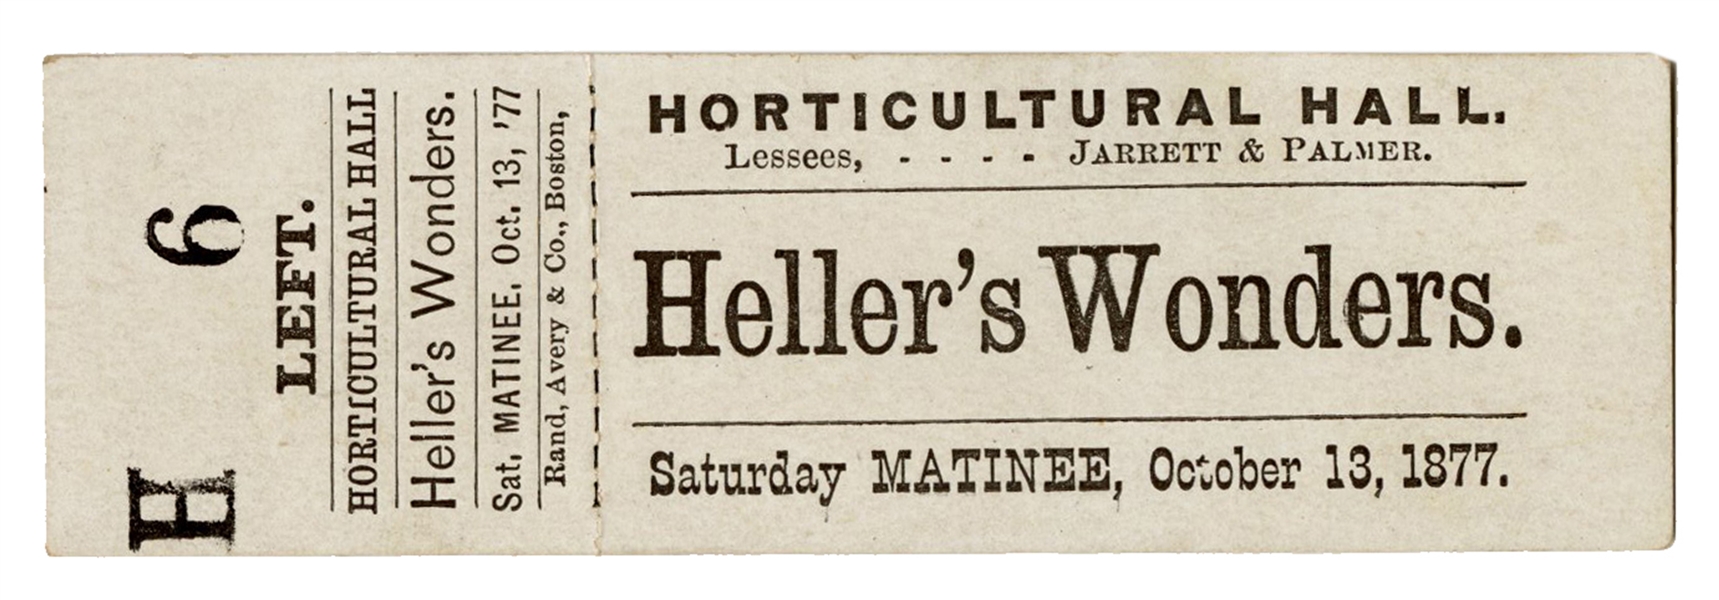 Ticket to Heller’s Wonders at Horticultural Hall, Boston.